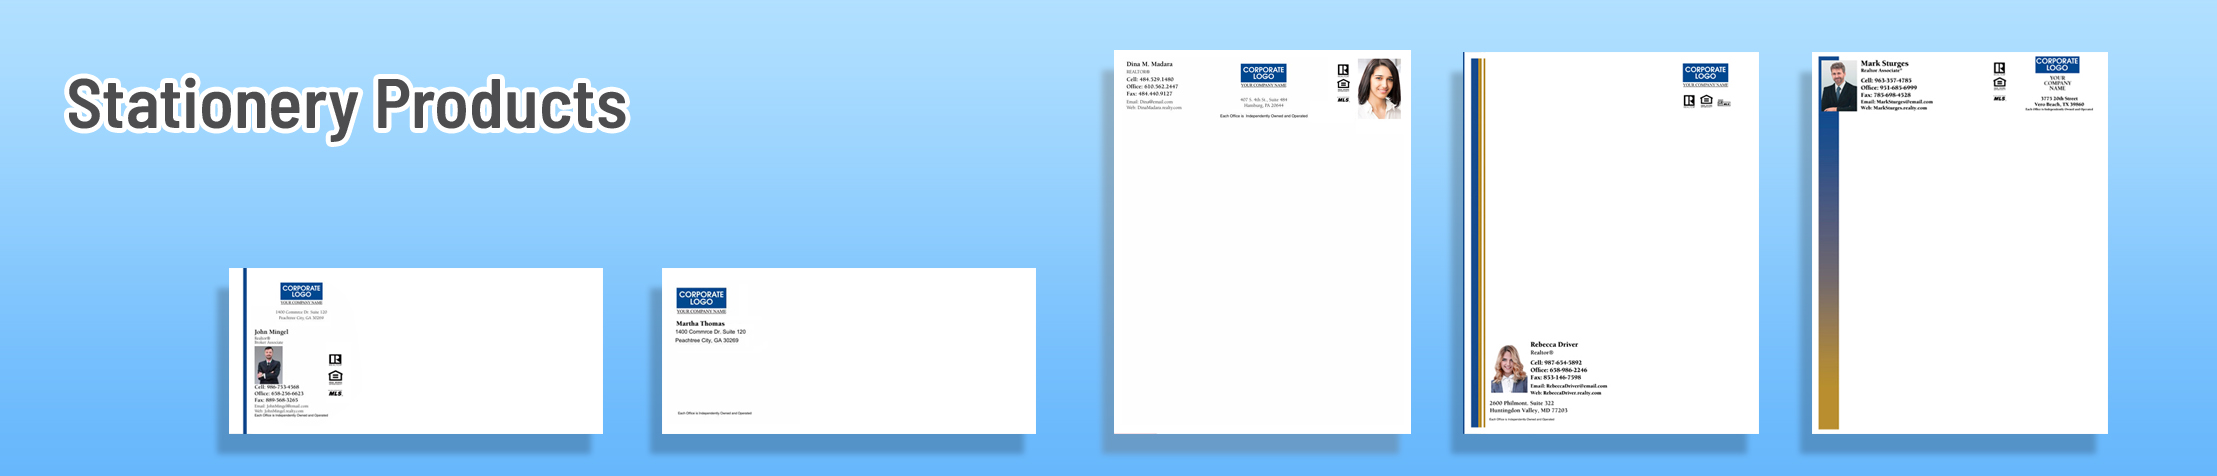 Coldwell Banker Real Estate Stationery Products - Coldwell Banker - Custom Letterhead & Envelopes Stationery Products for Realtors | SparkPrint.com